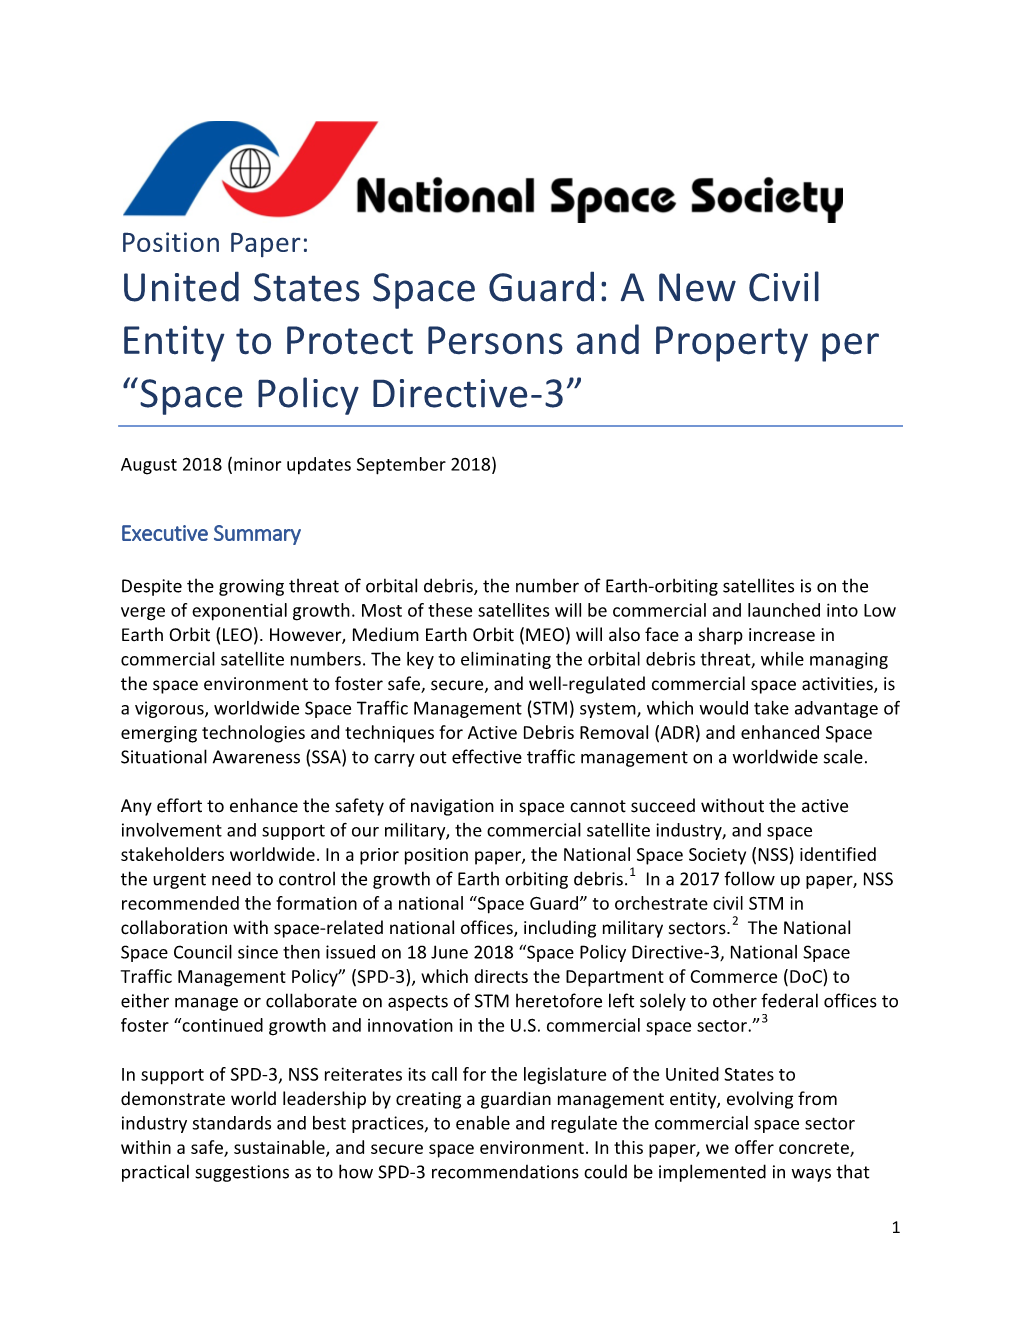 United States Space Guard: a New Civil Entity to Protect Persons and Property Per “Space Policy Directive-3”